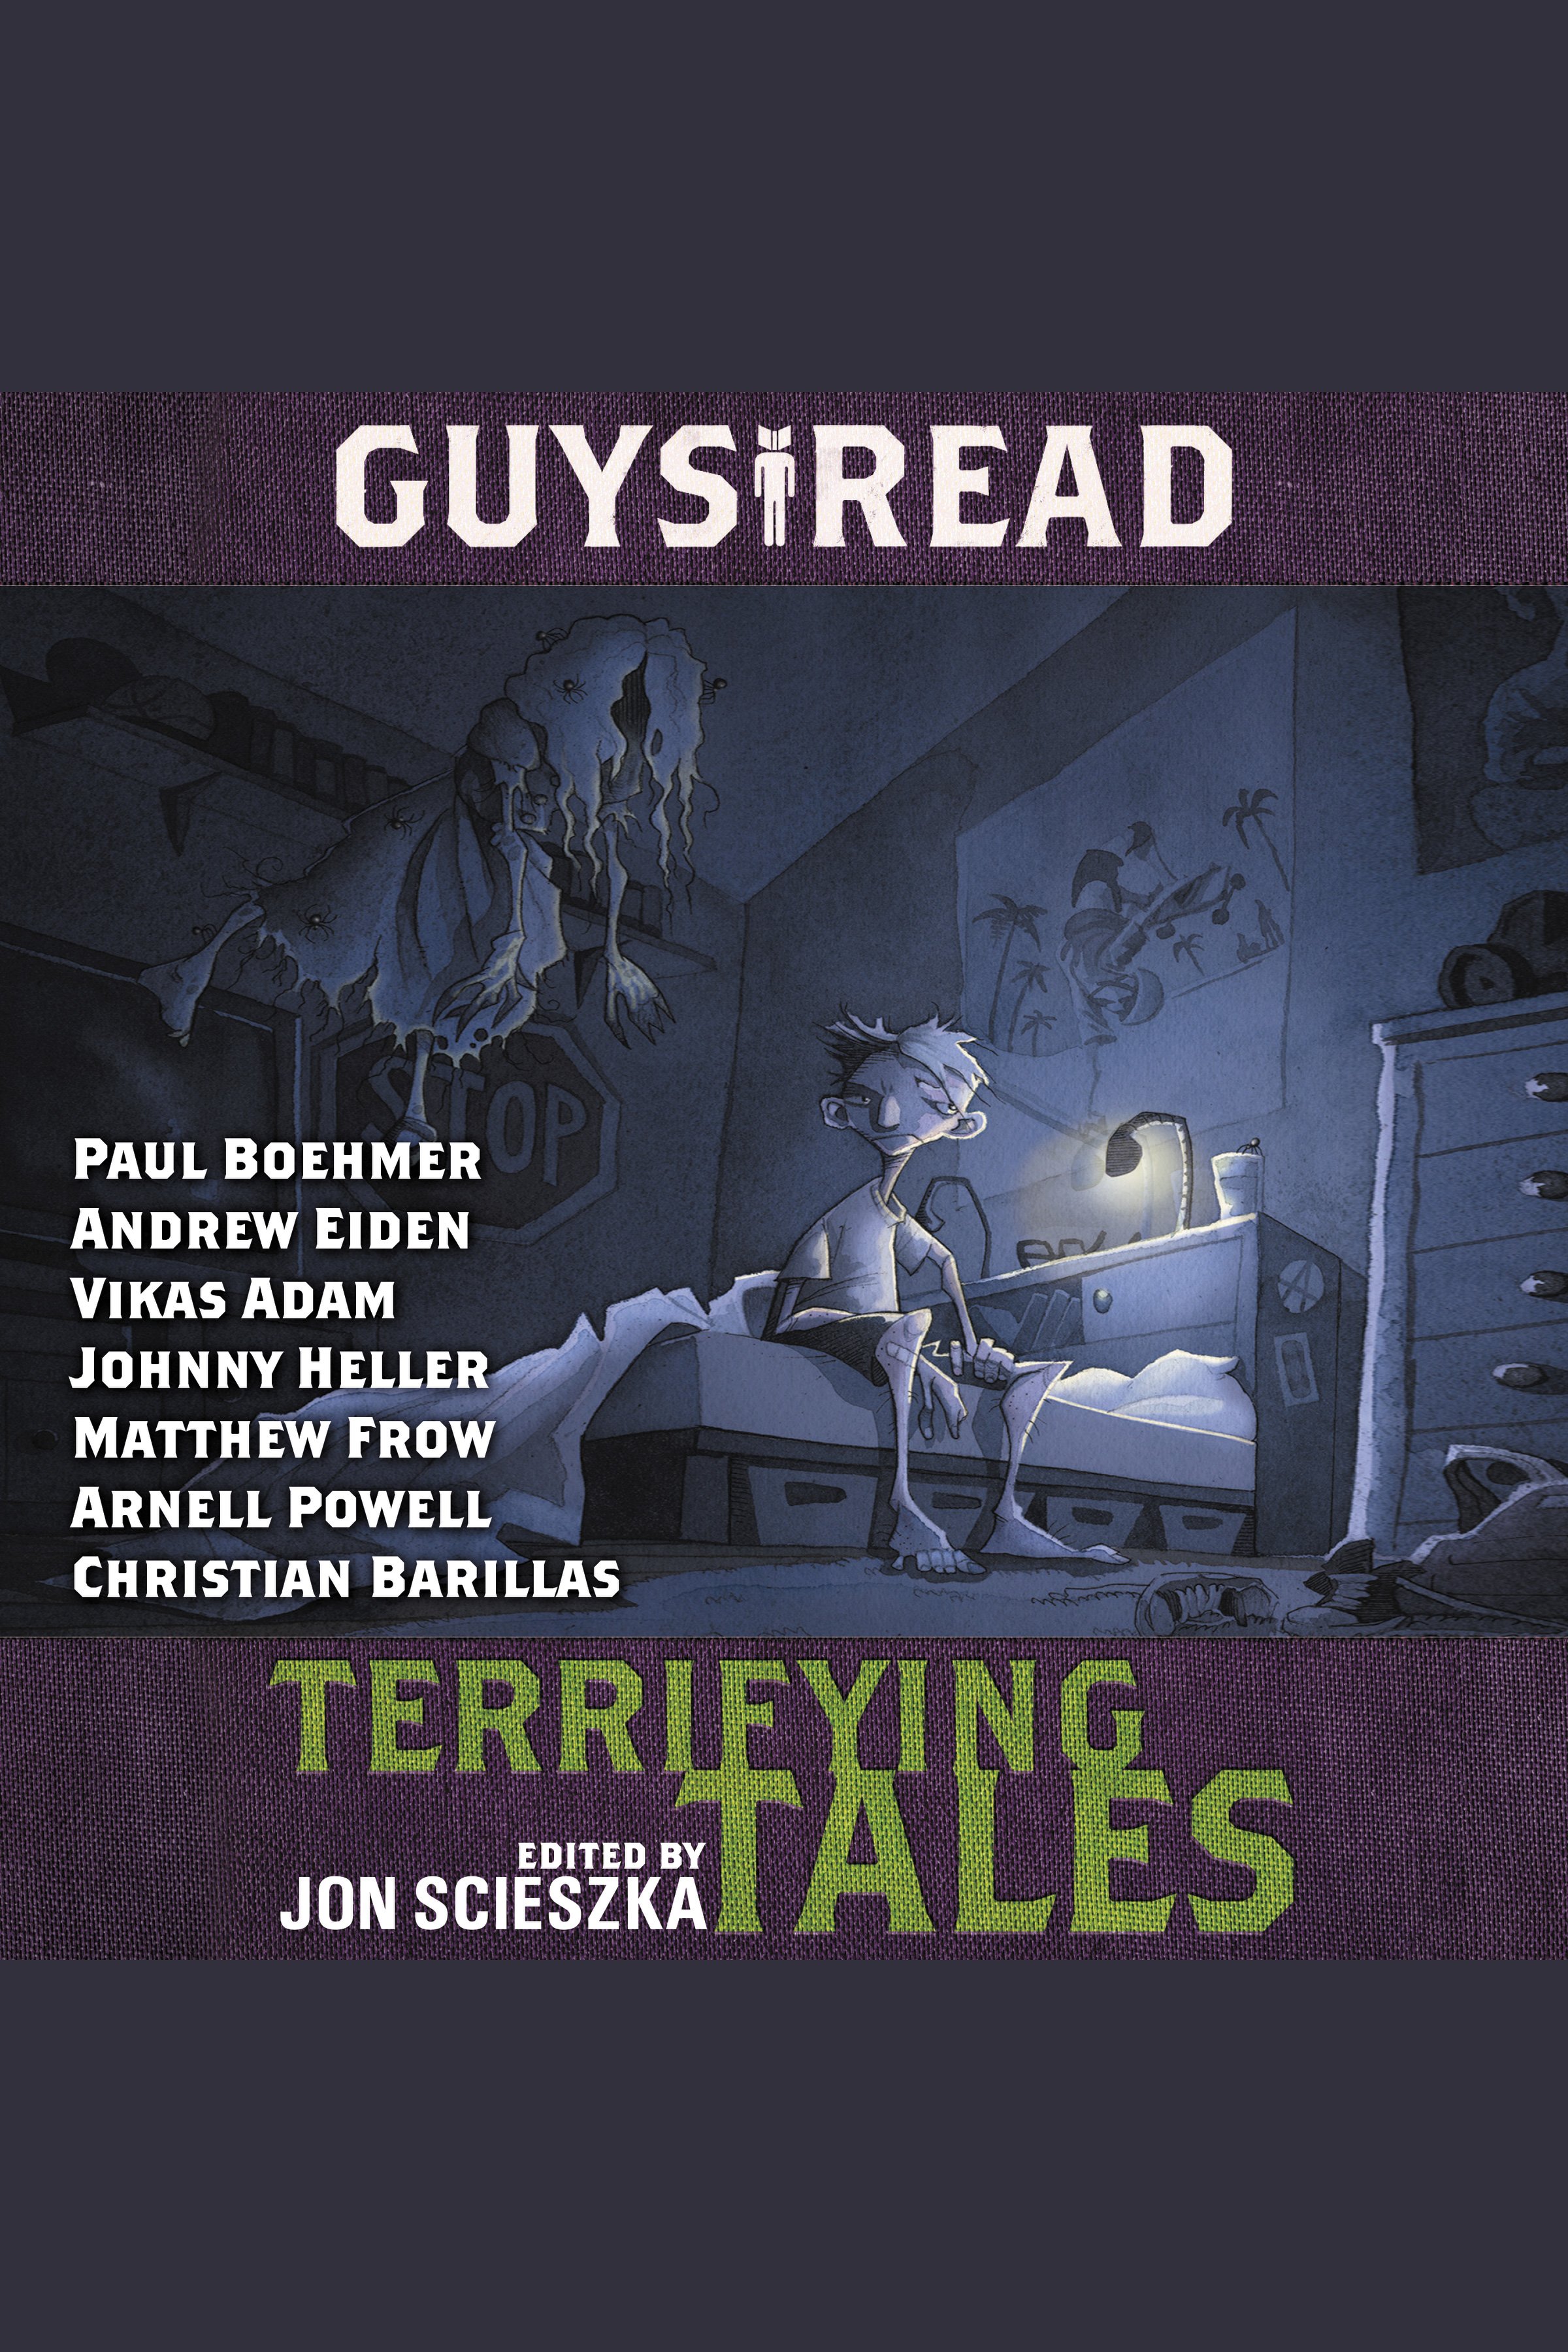 Guys read terrifying tales cover image